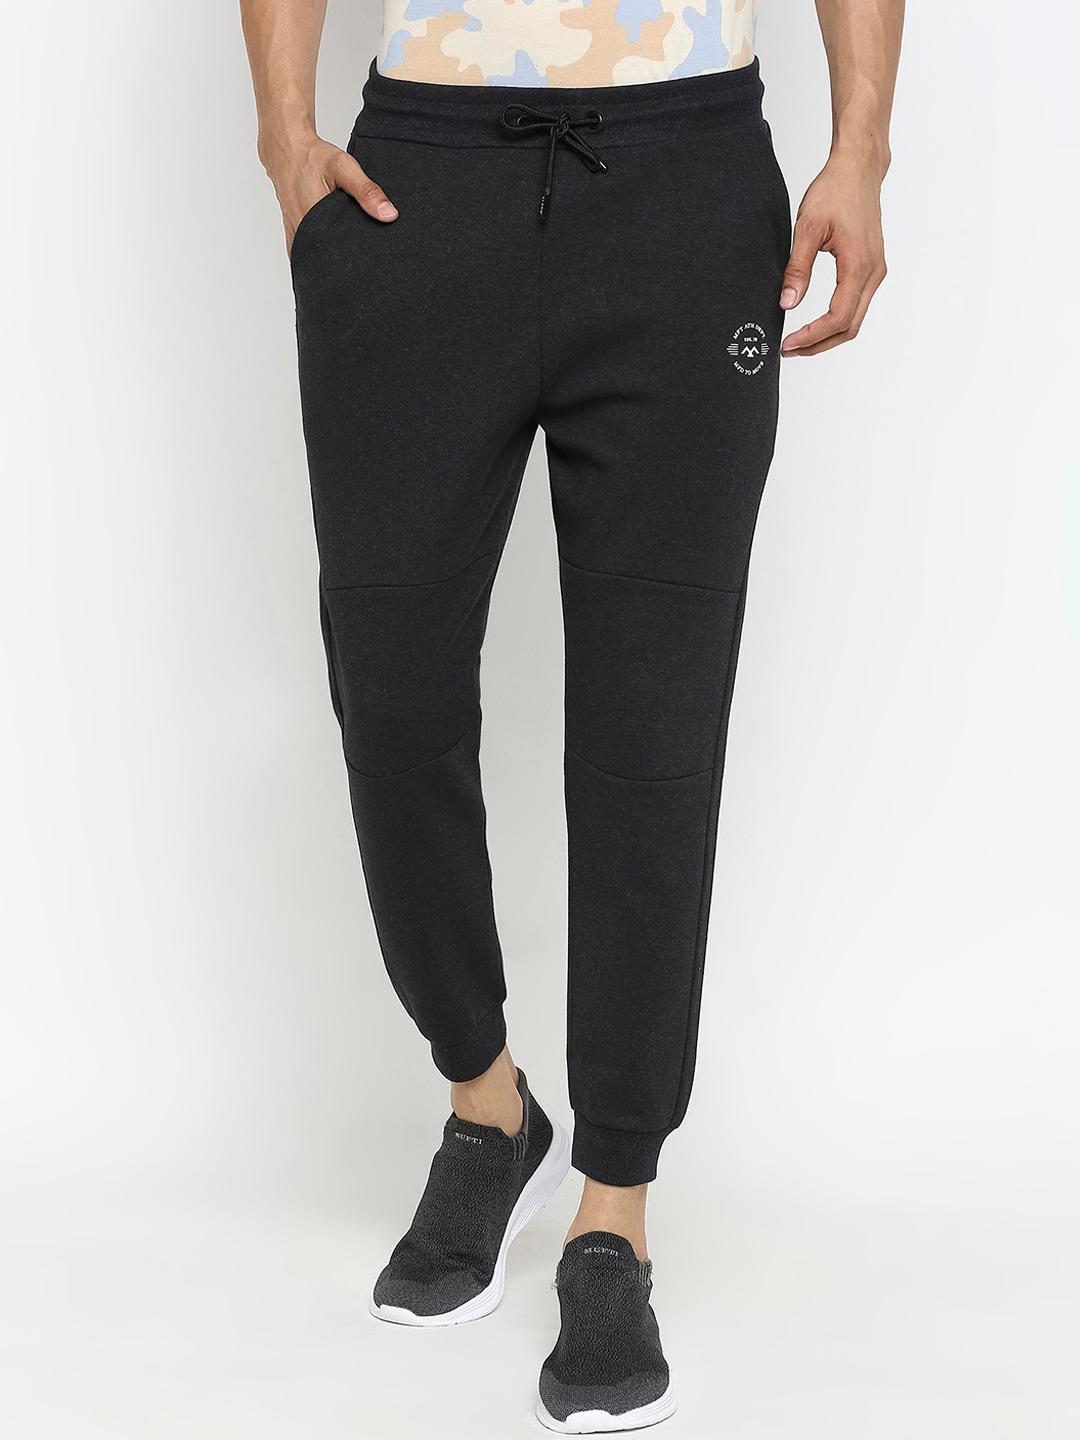 mufti-men-charcoal-grey-solid-sport-edition-knitted-jogger